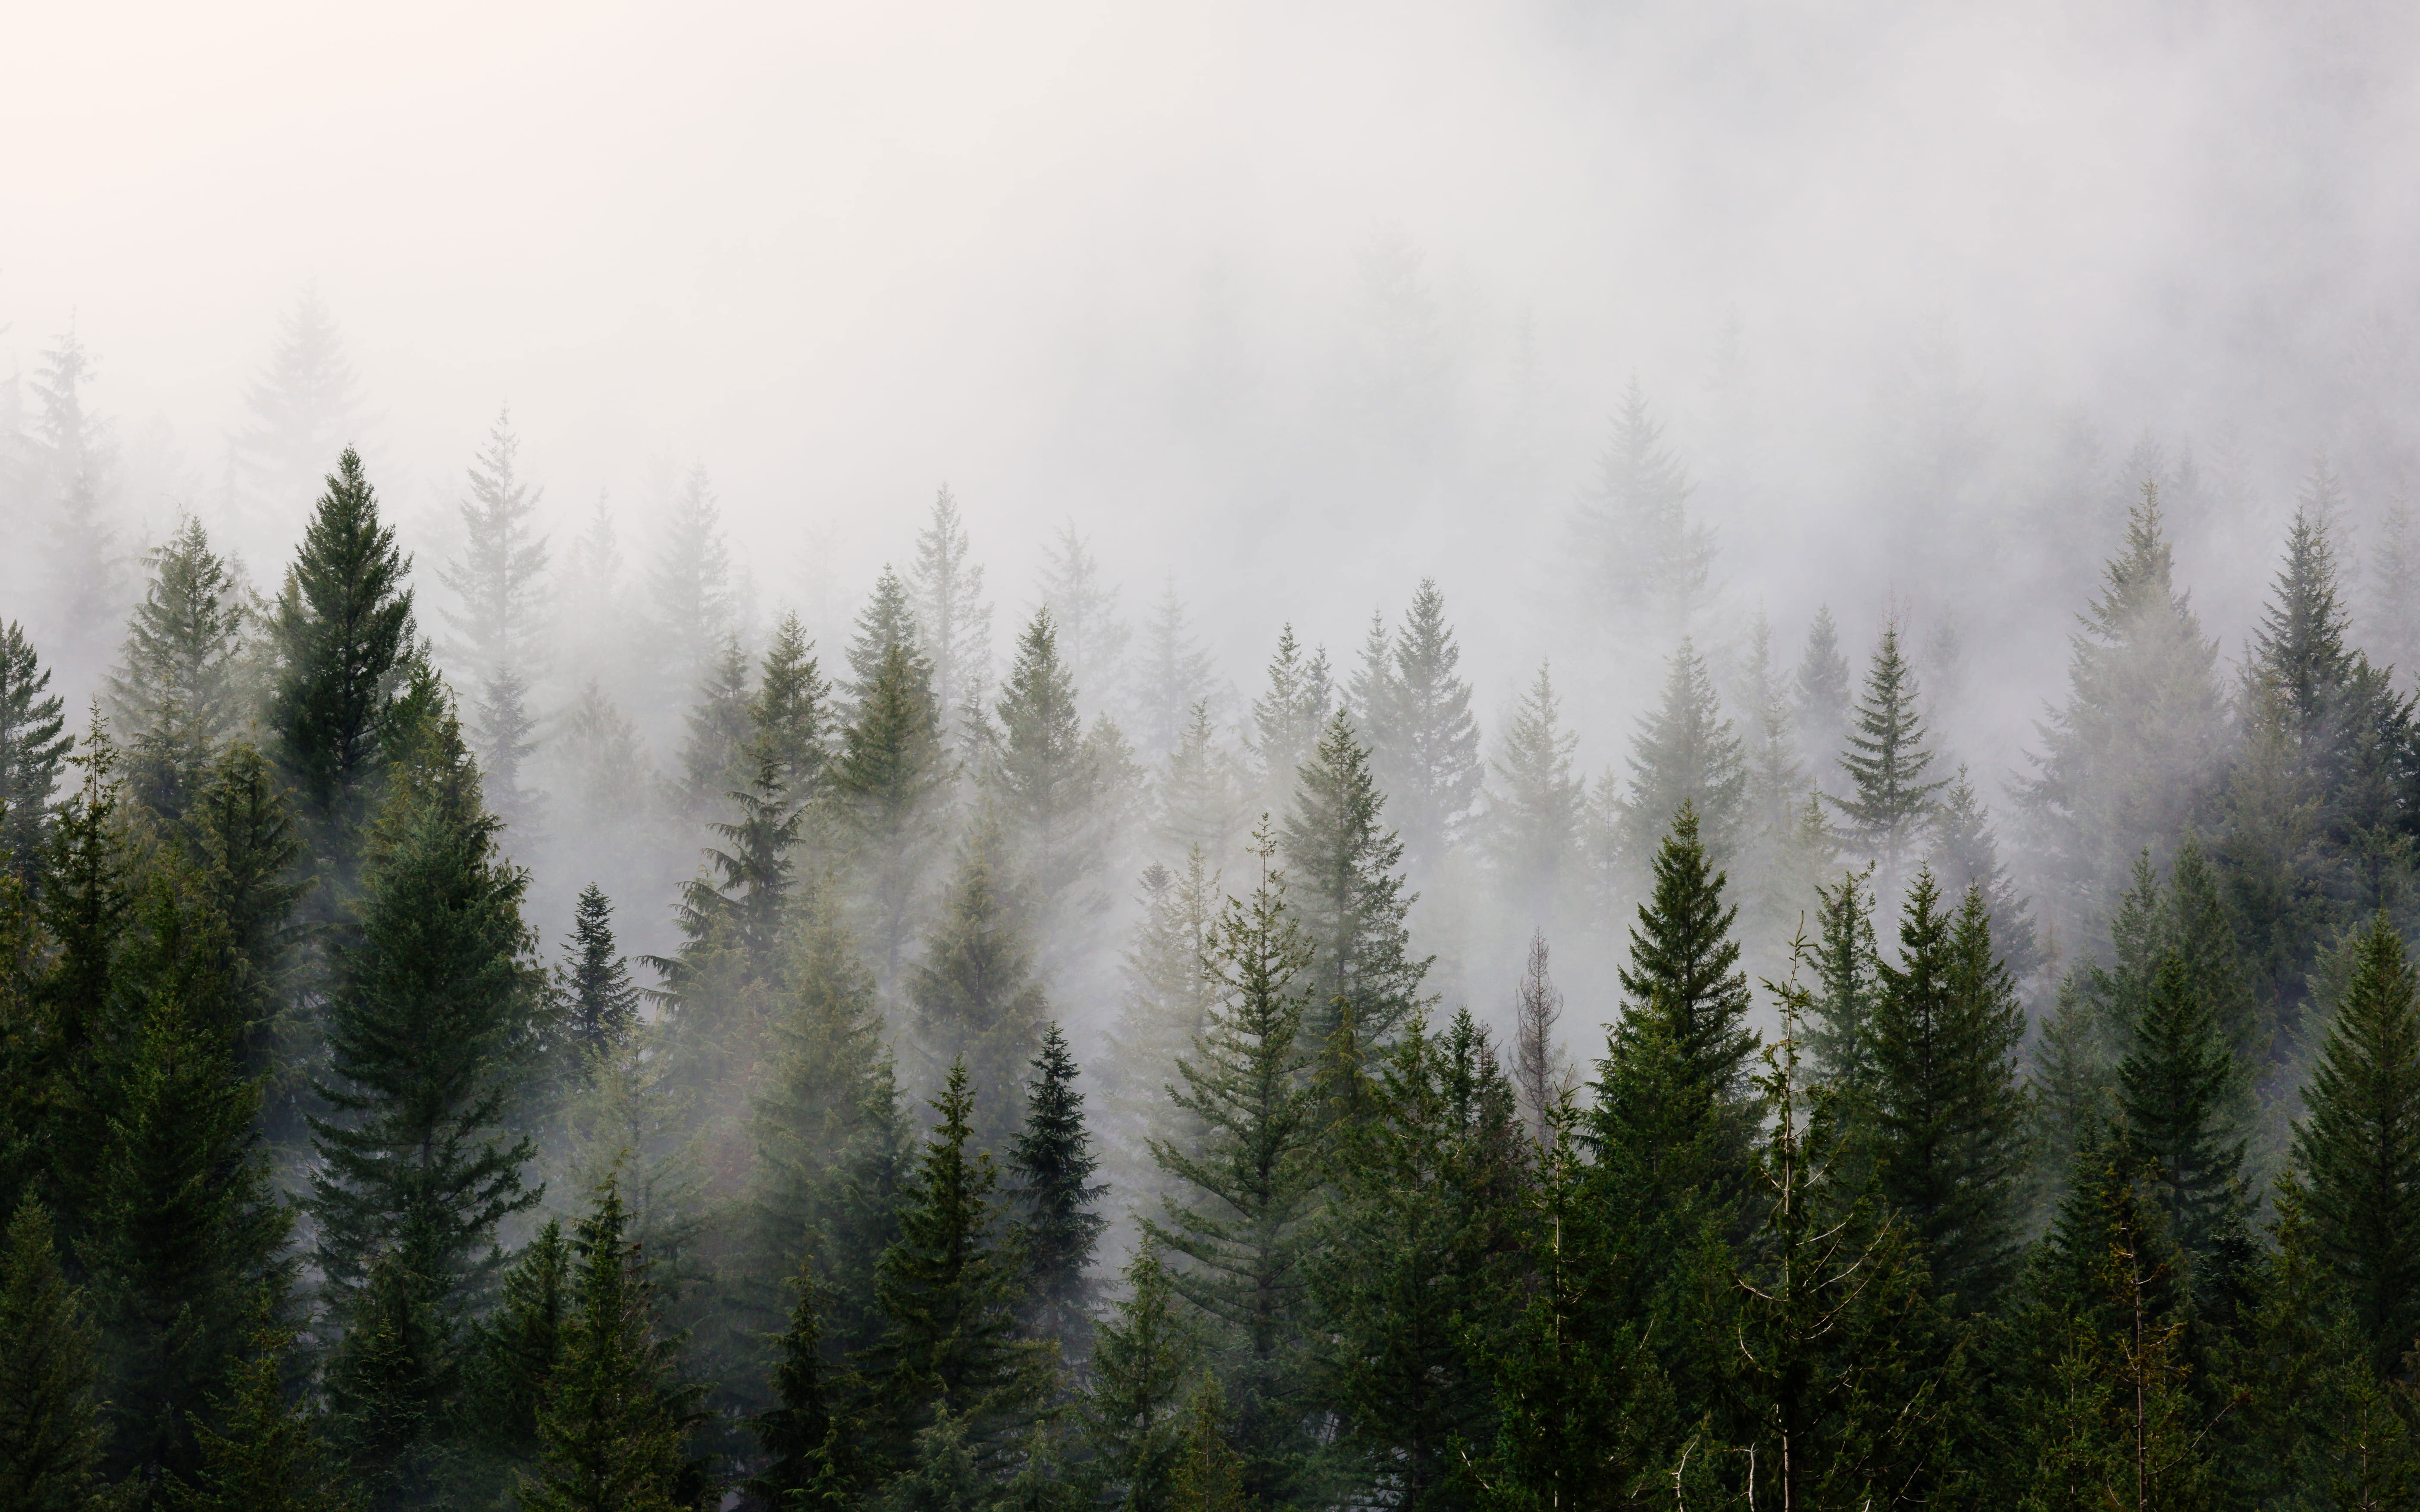 Wallpaper Green Pine Trees With Fog, Pine Trees, nature, Nature